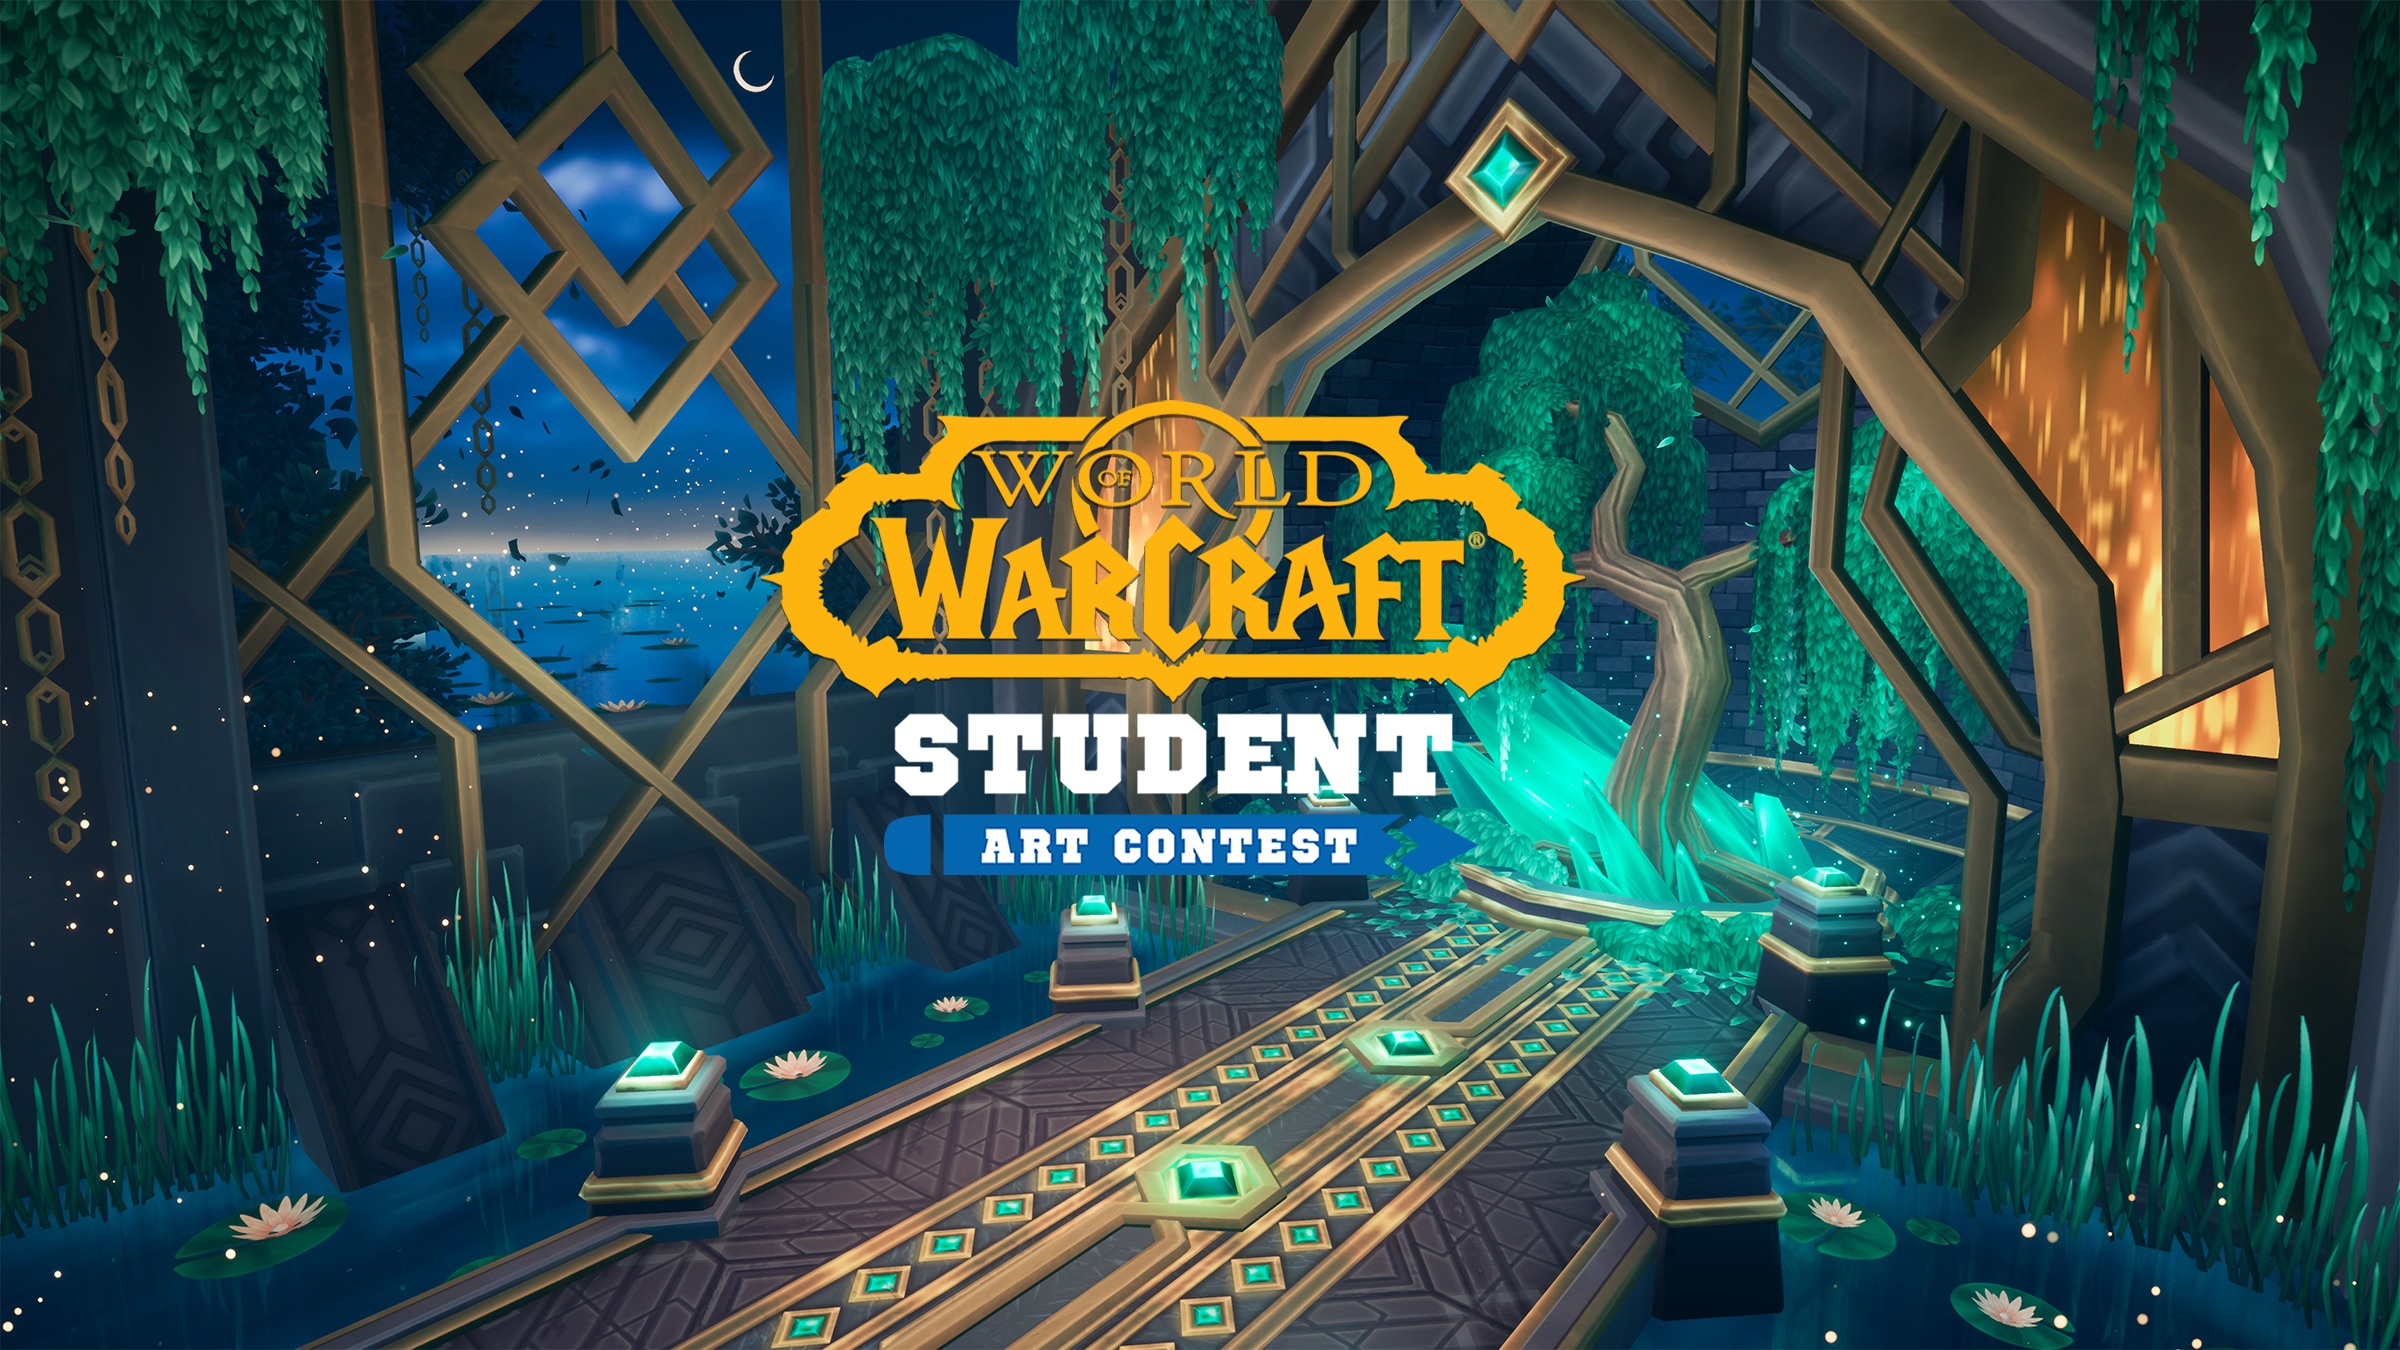 Announcing the World of Warcraft Student Art Contest 2021 Winners!